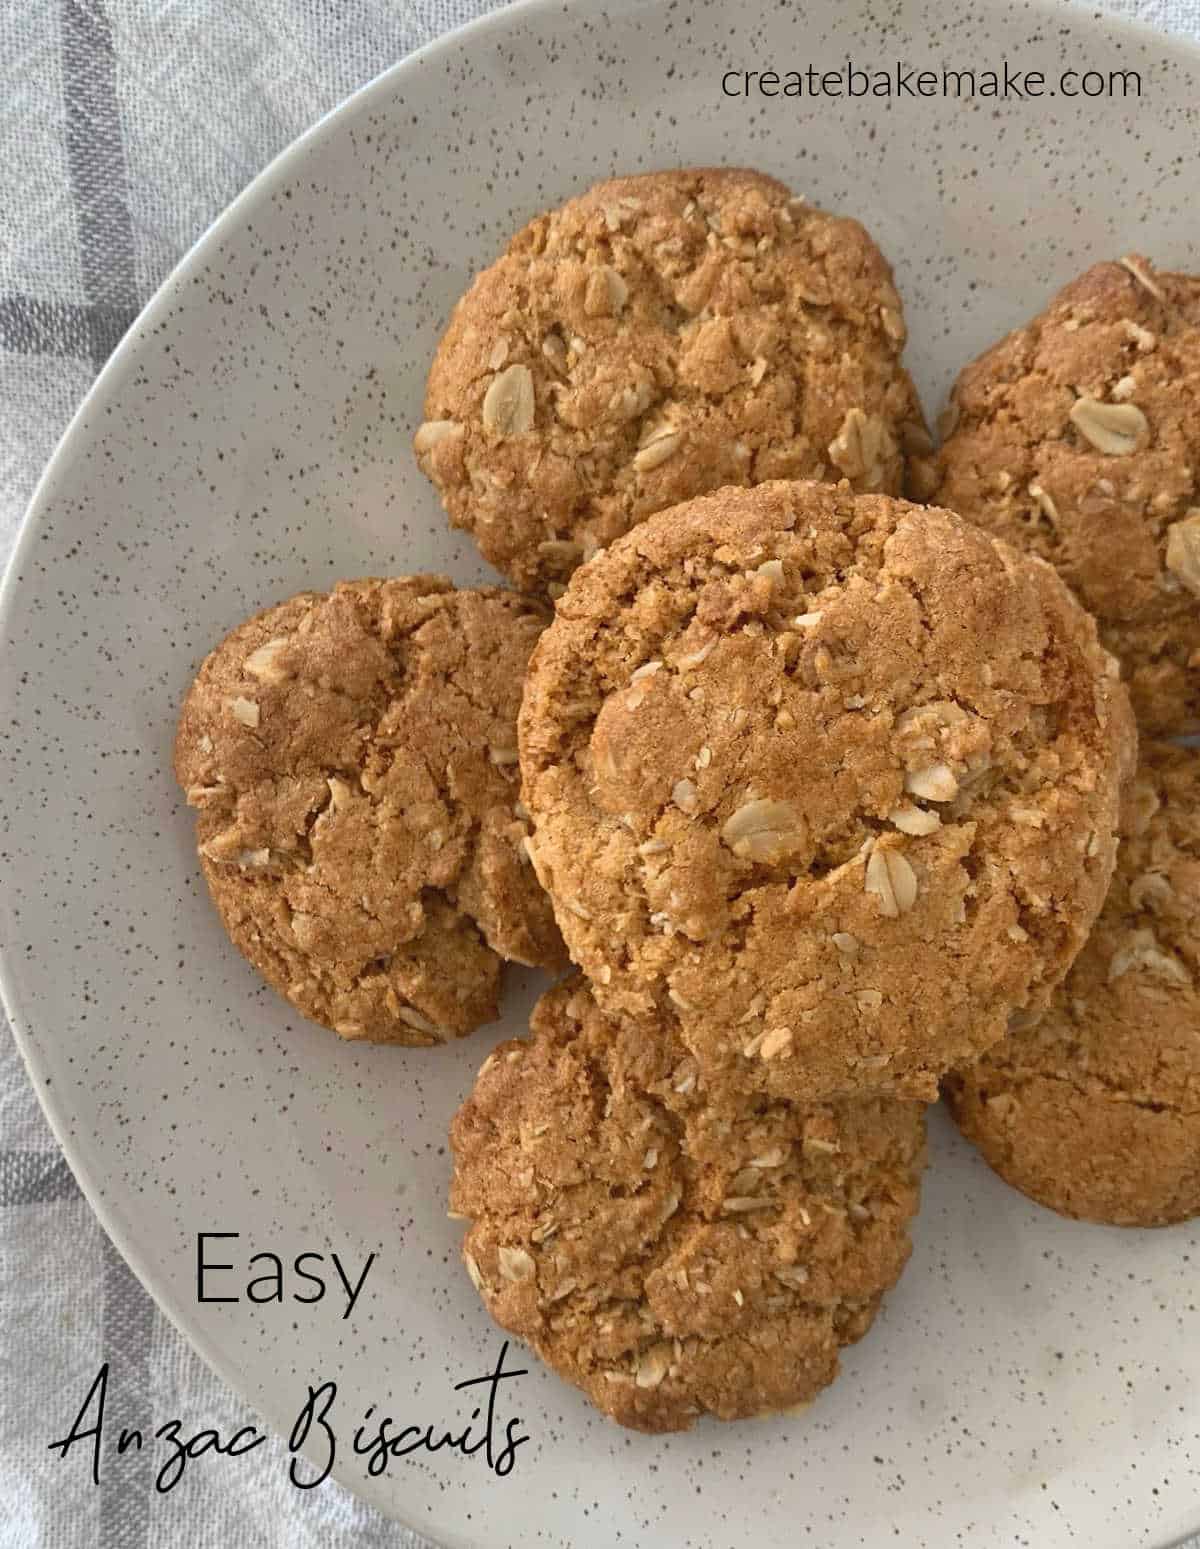 six Anzac Biscuits on a specked plate.